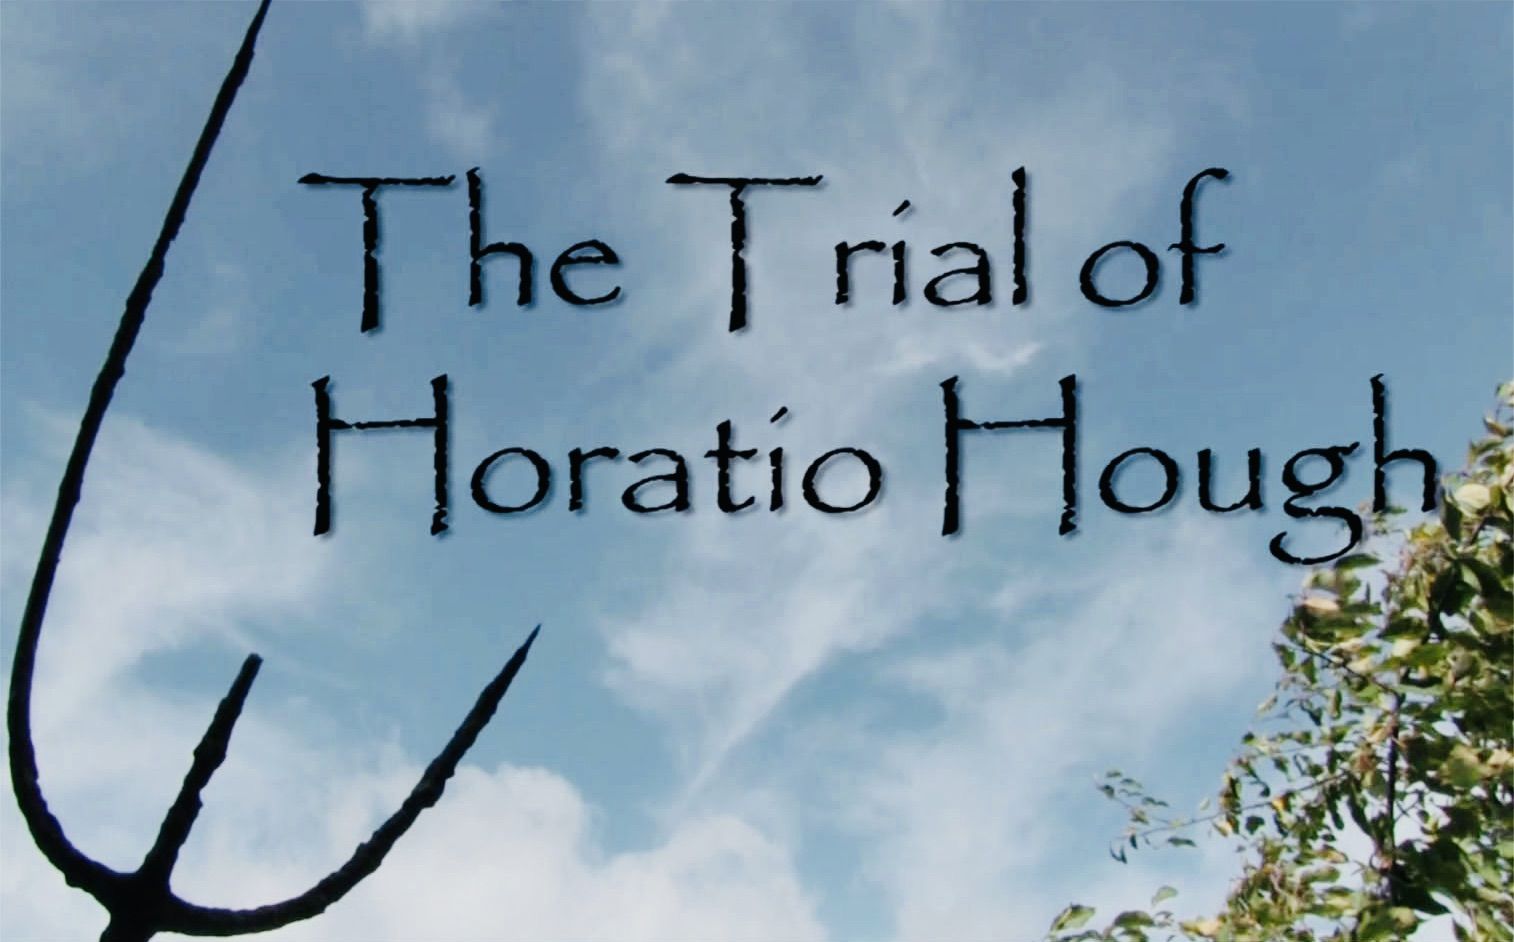 The Trial of Horatio Hough